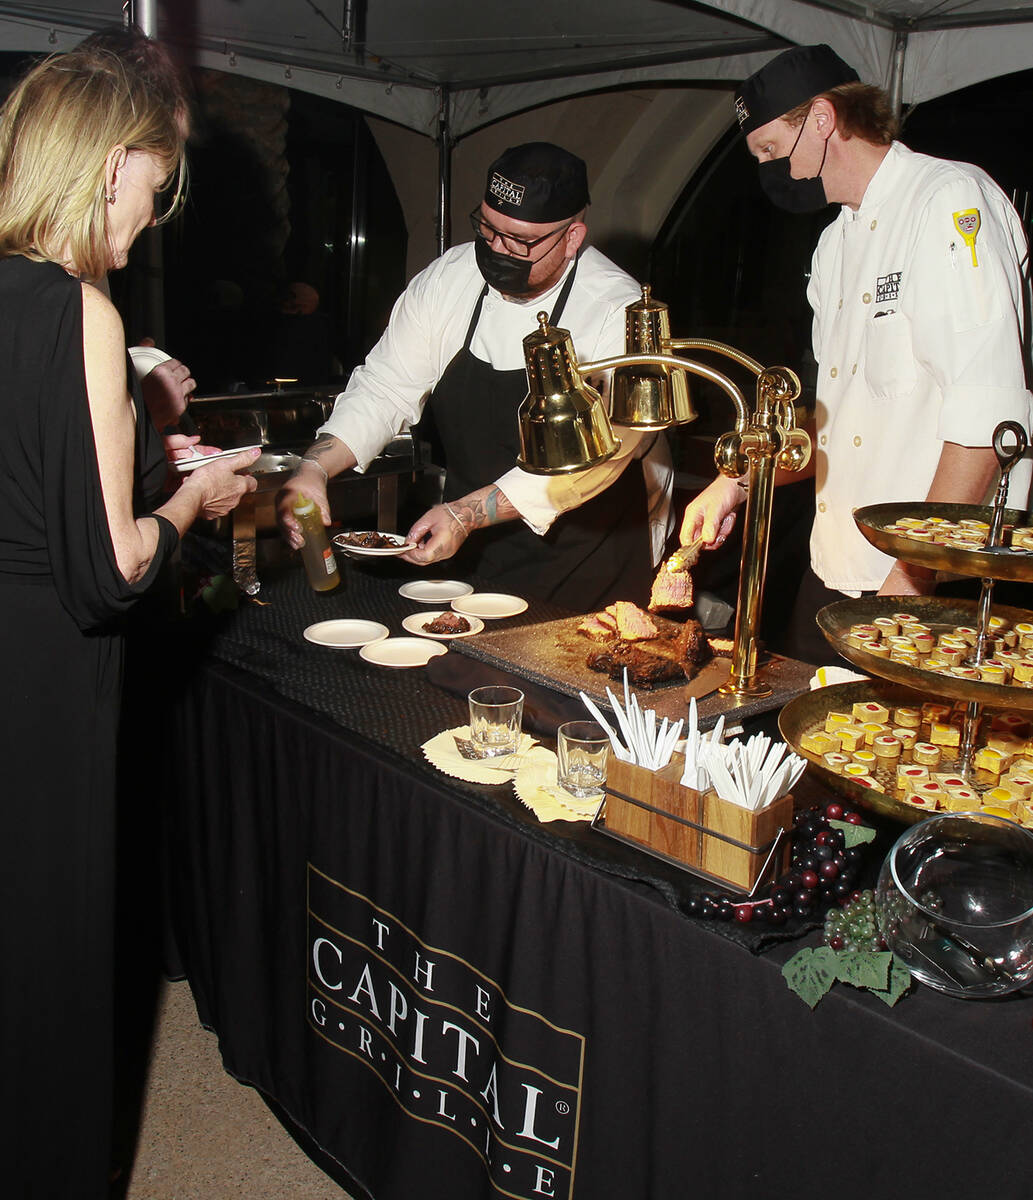 The food & wine fest will be held Oct. 8 from 5:30 to 10:30 p.m. (Lake Las Vegas)